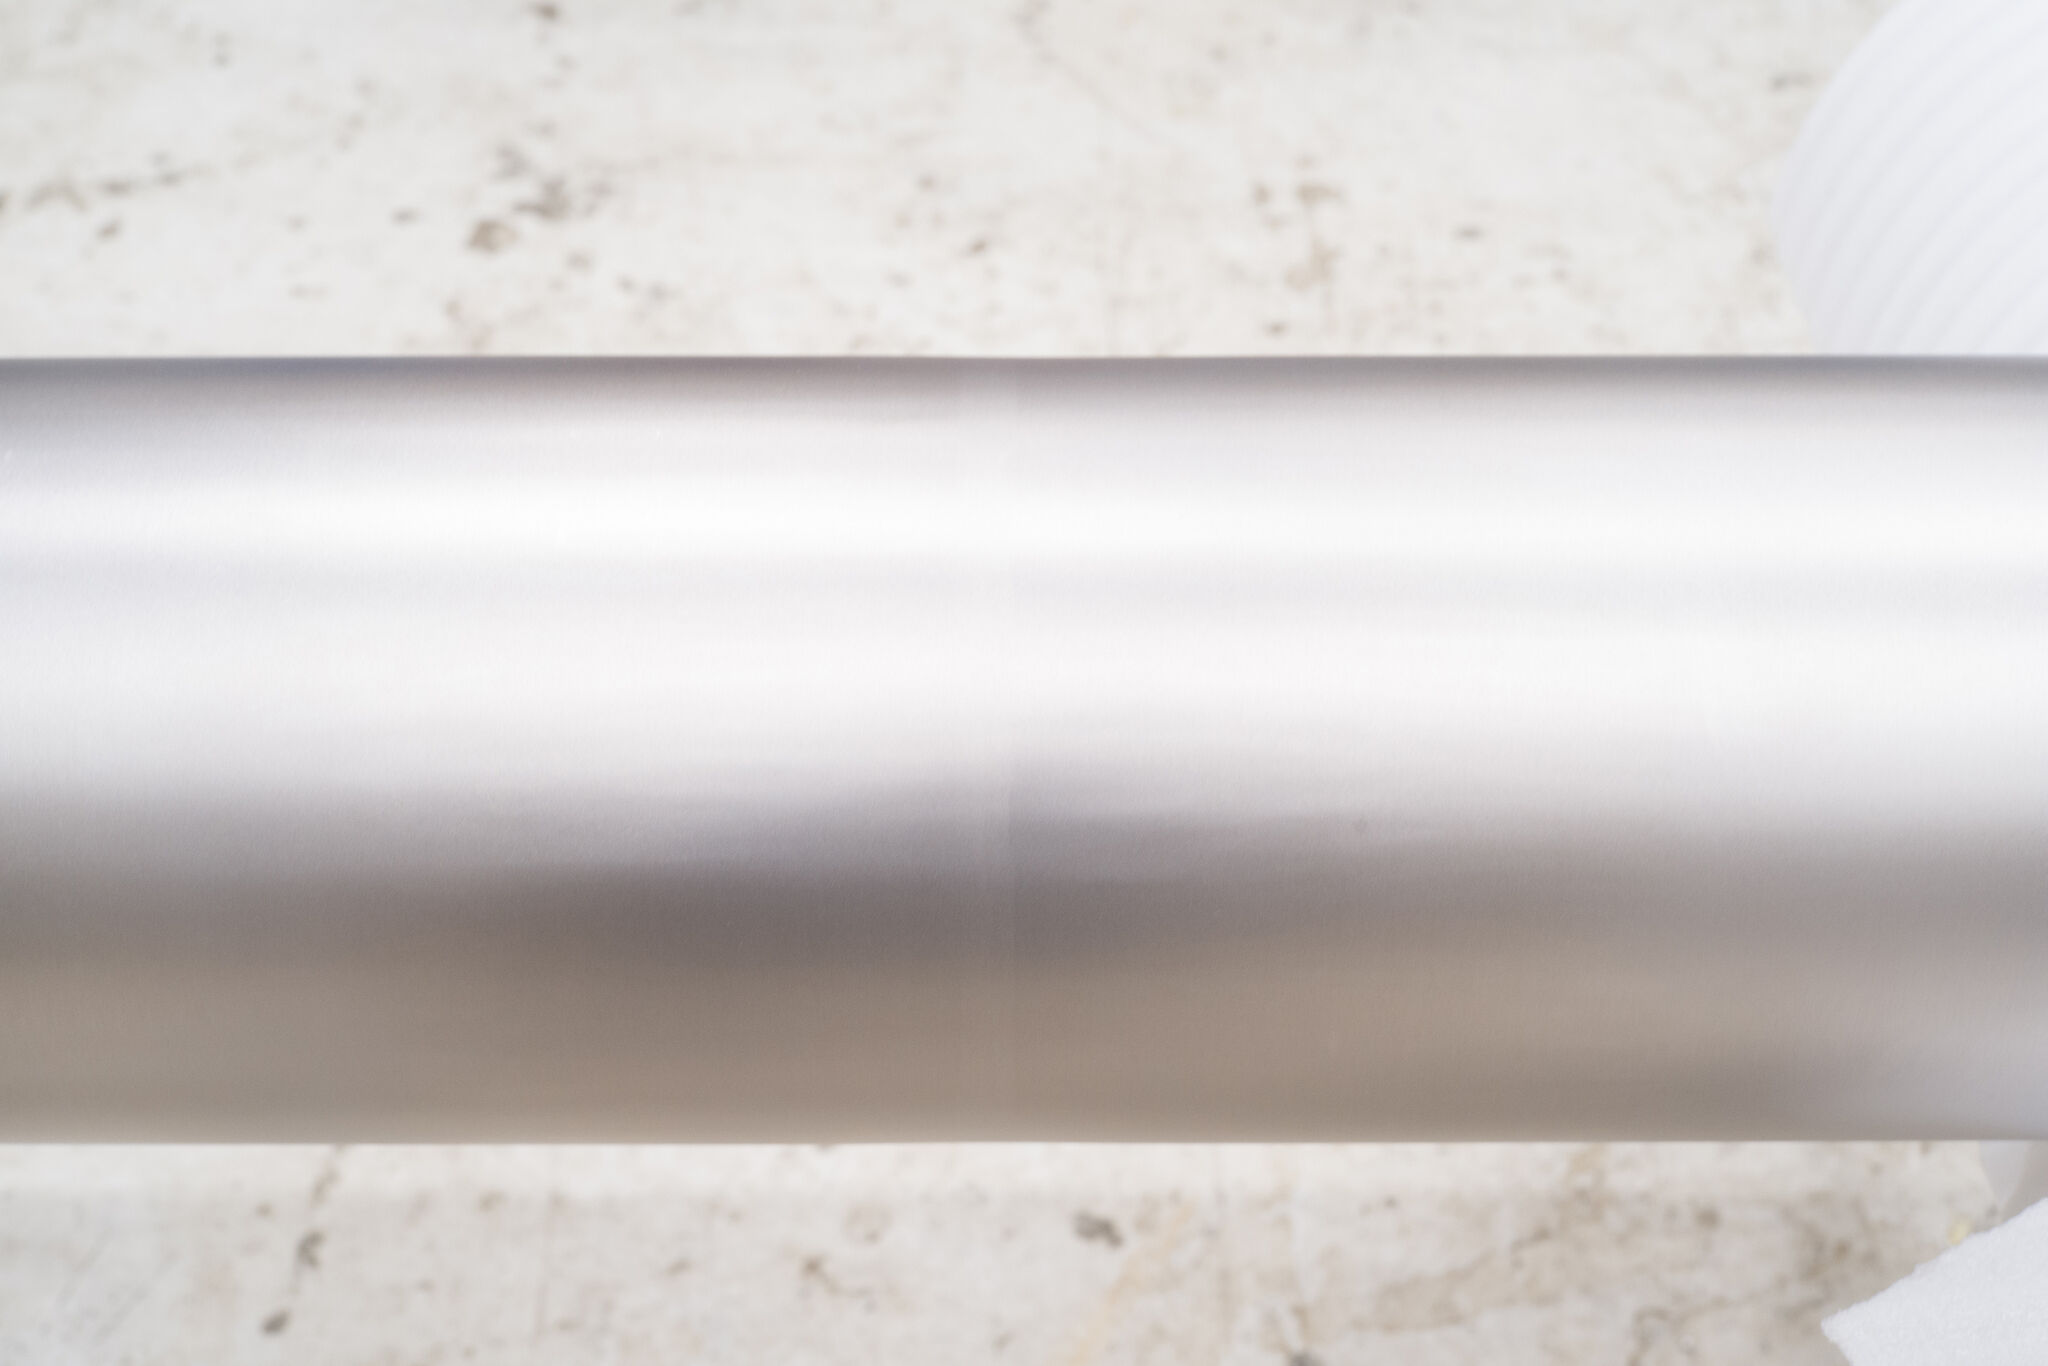 Close-up view of a shiny stainless steel pipe.